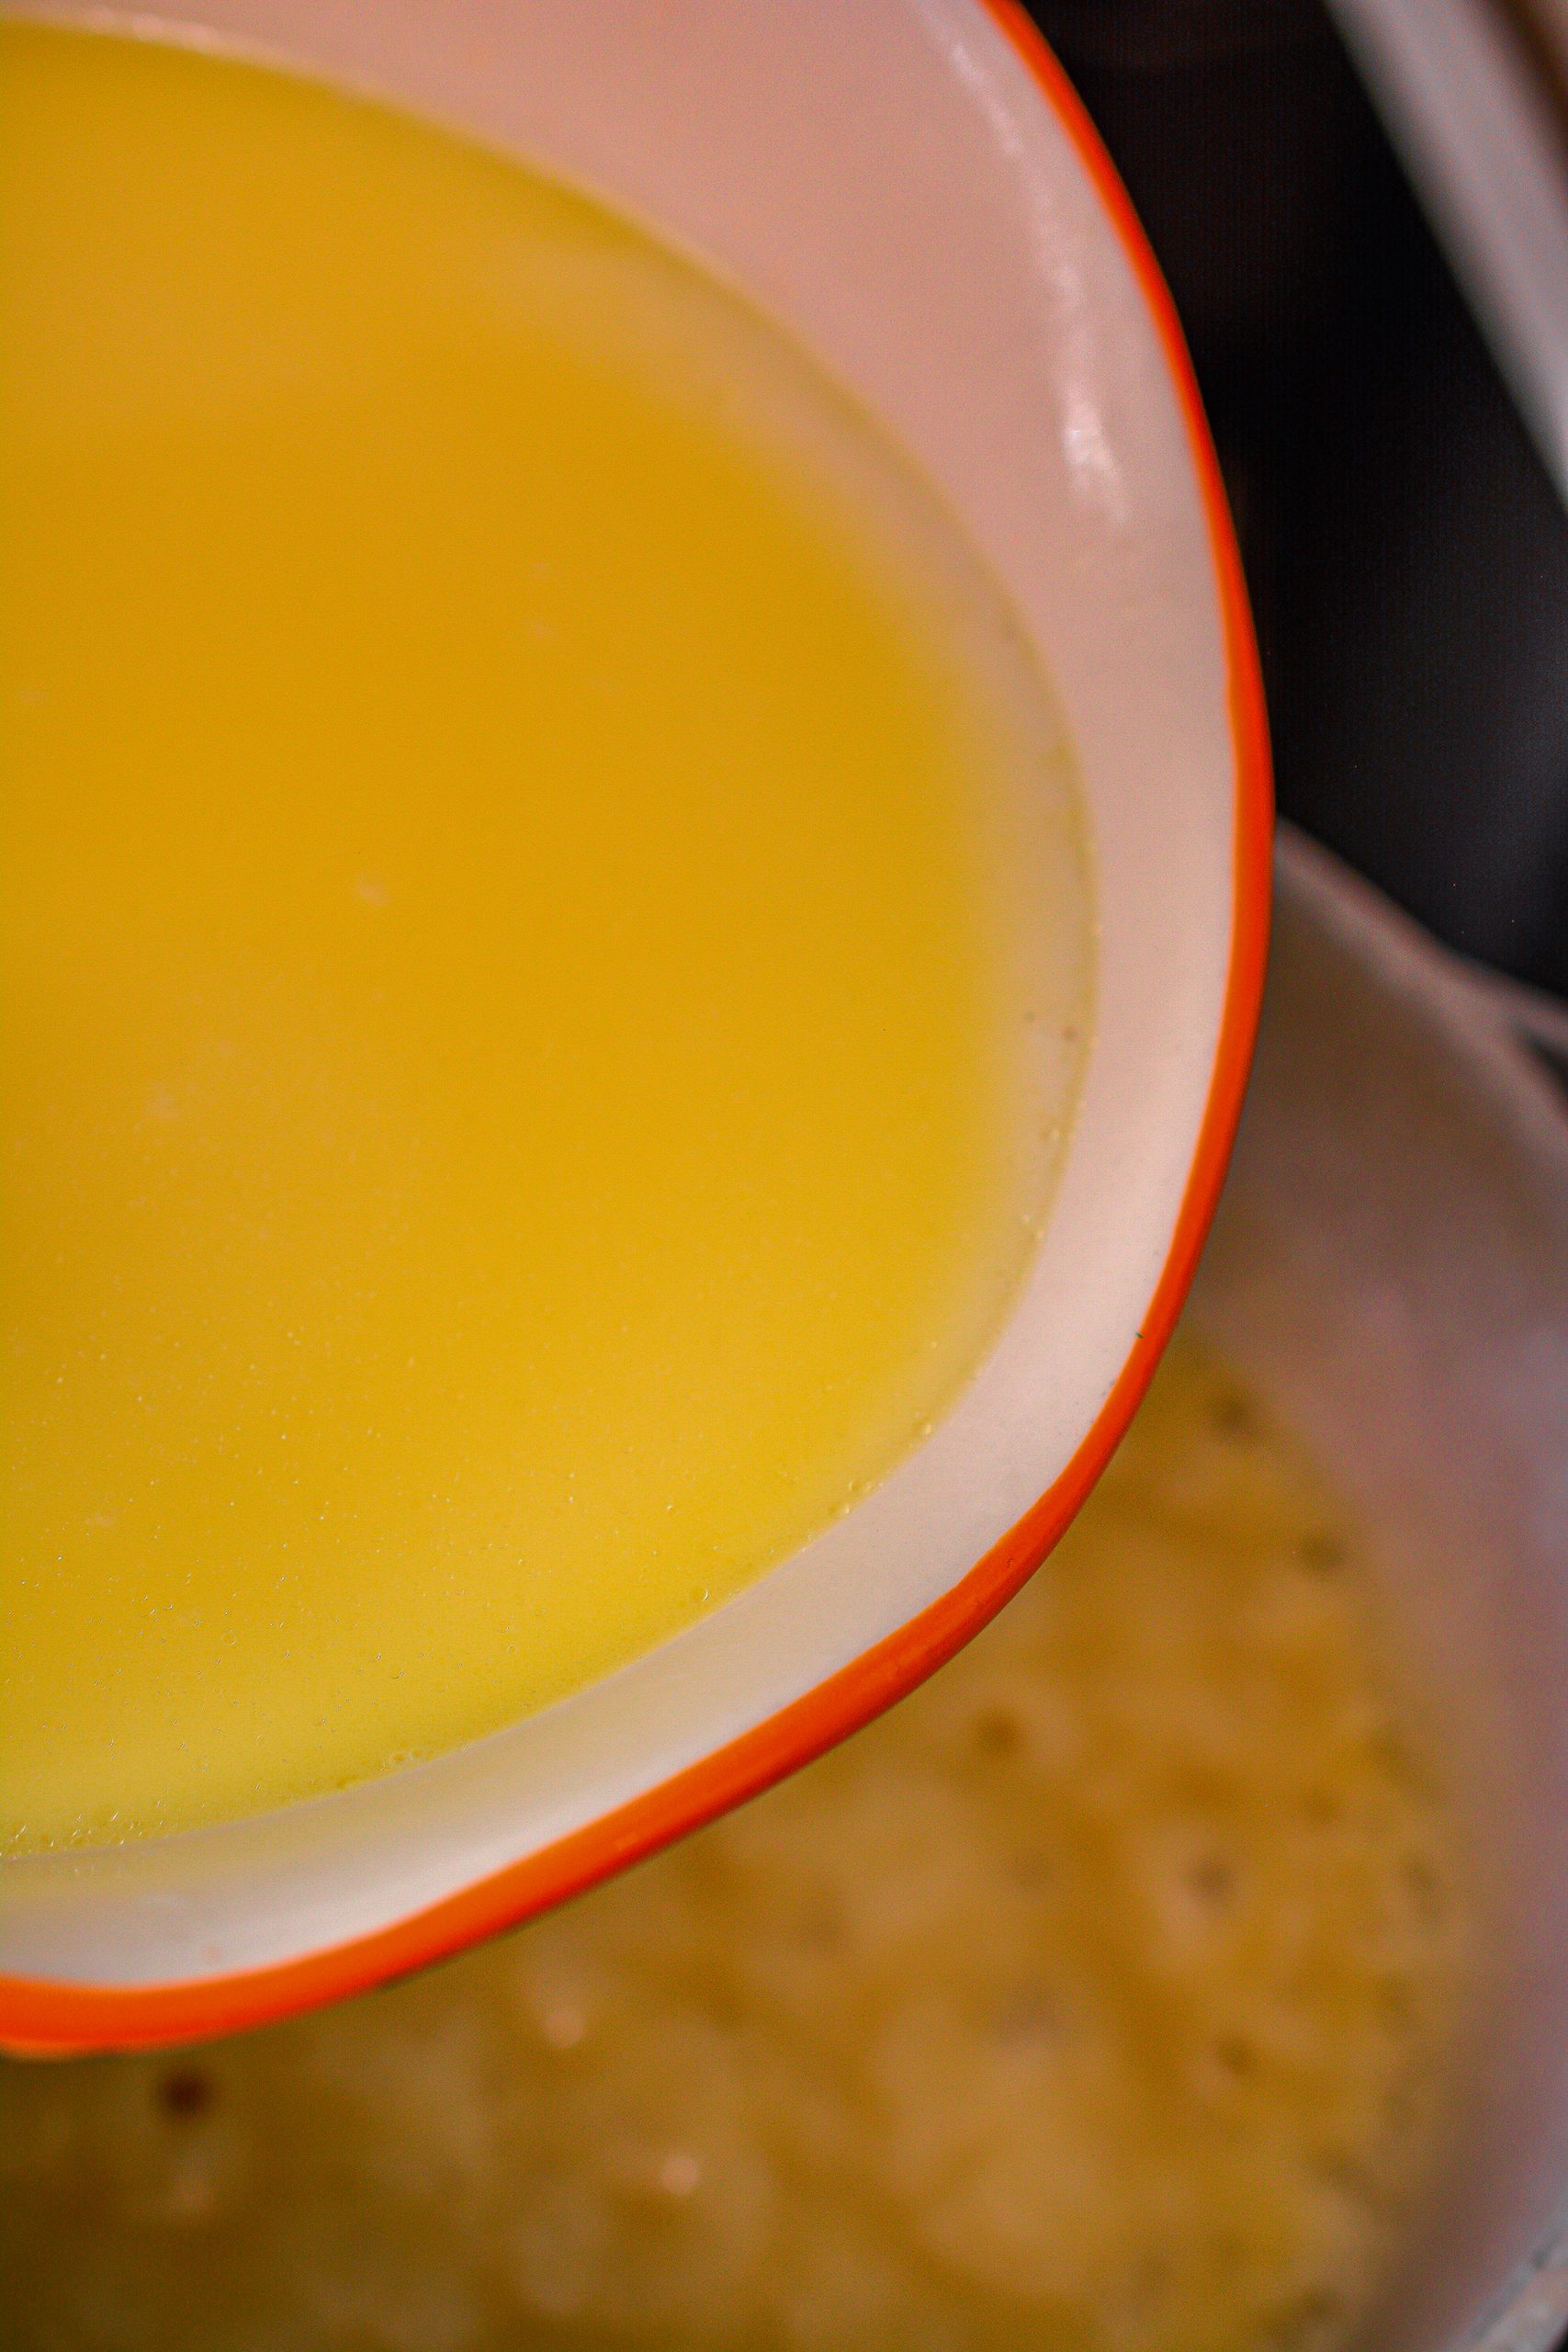 Mix together the milk and reserved cooking liquid. Slowly whisk it into the saucepan.